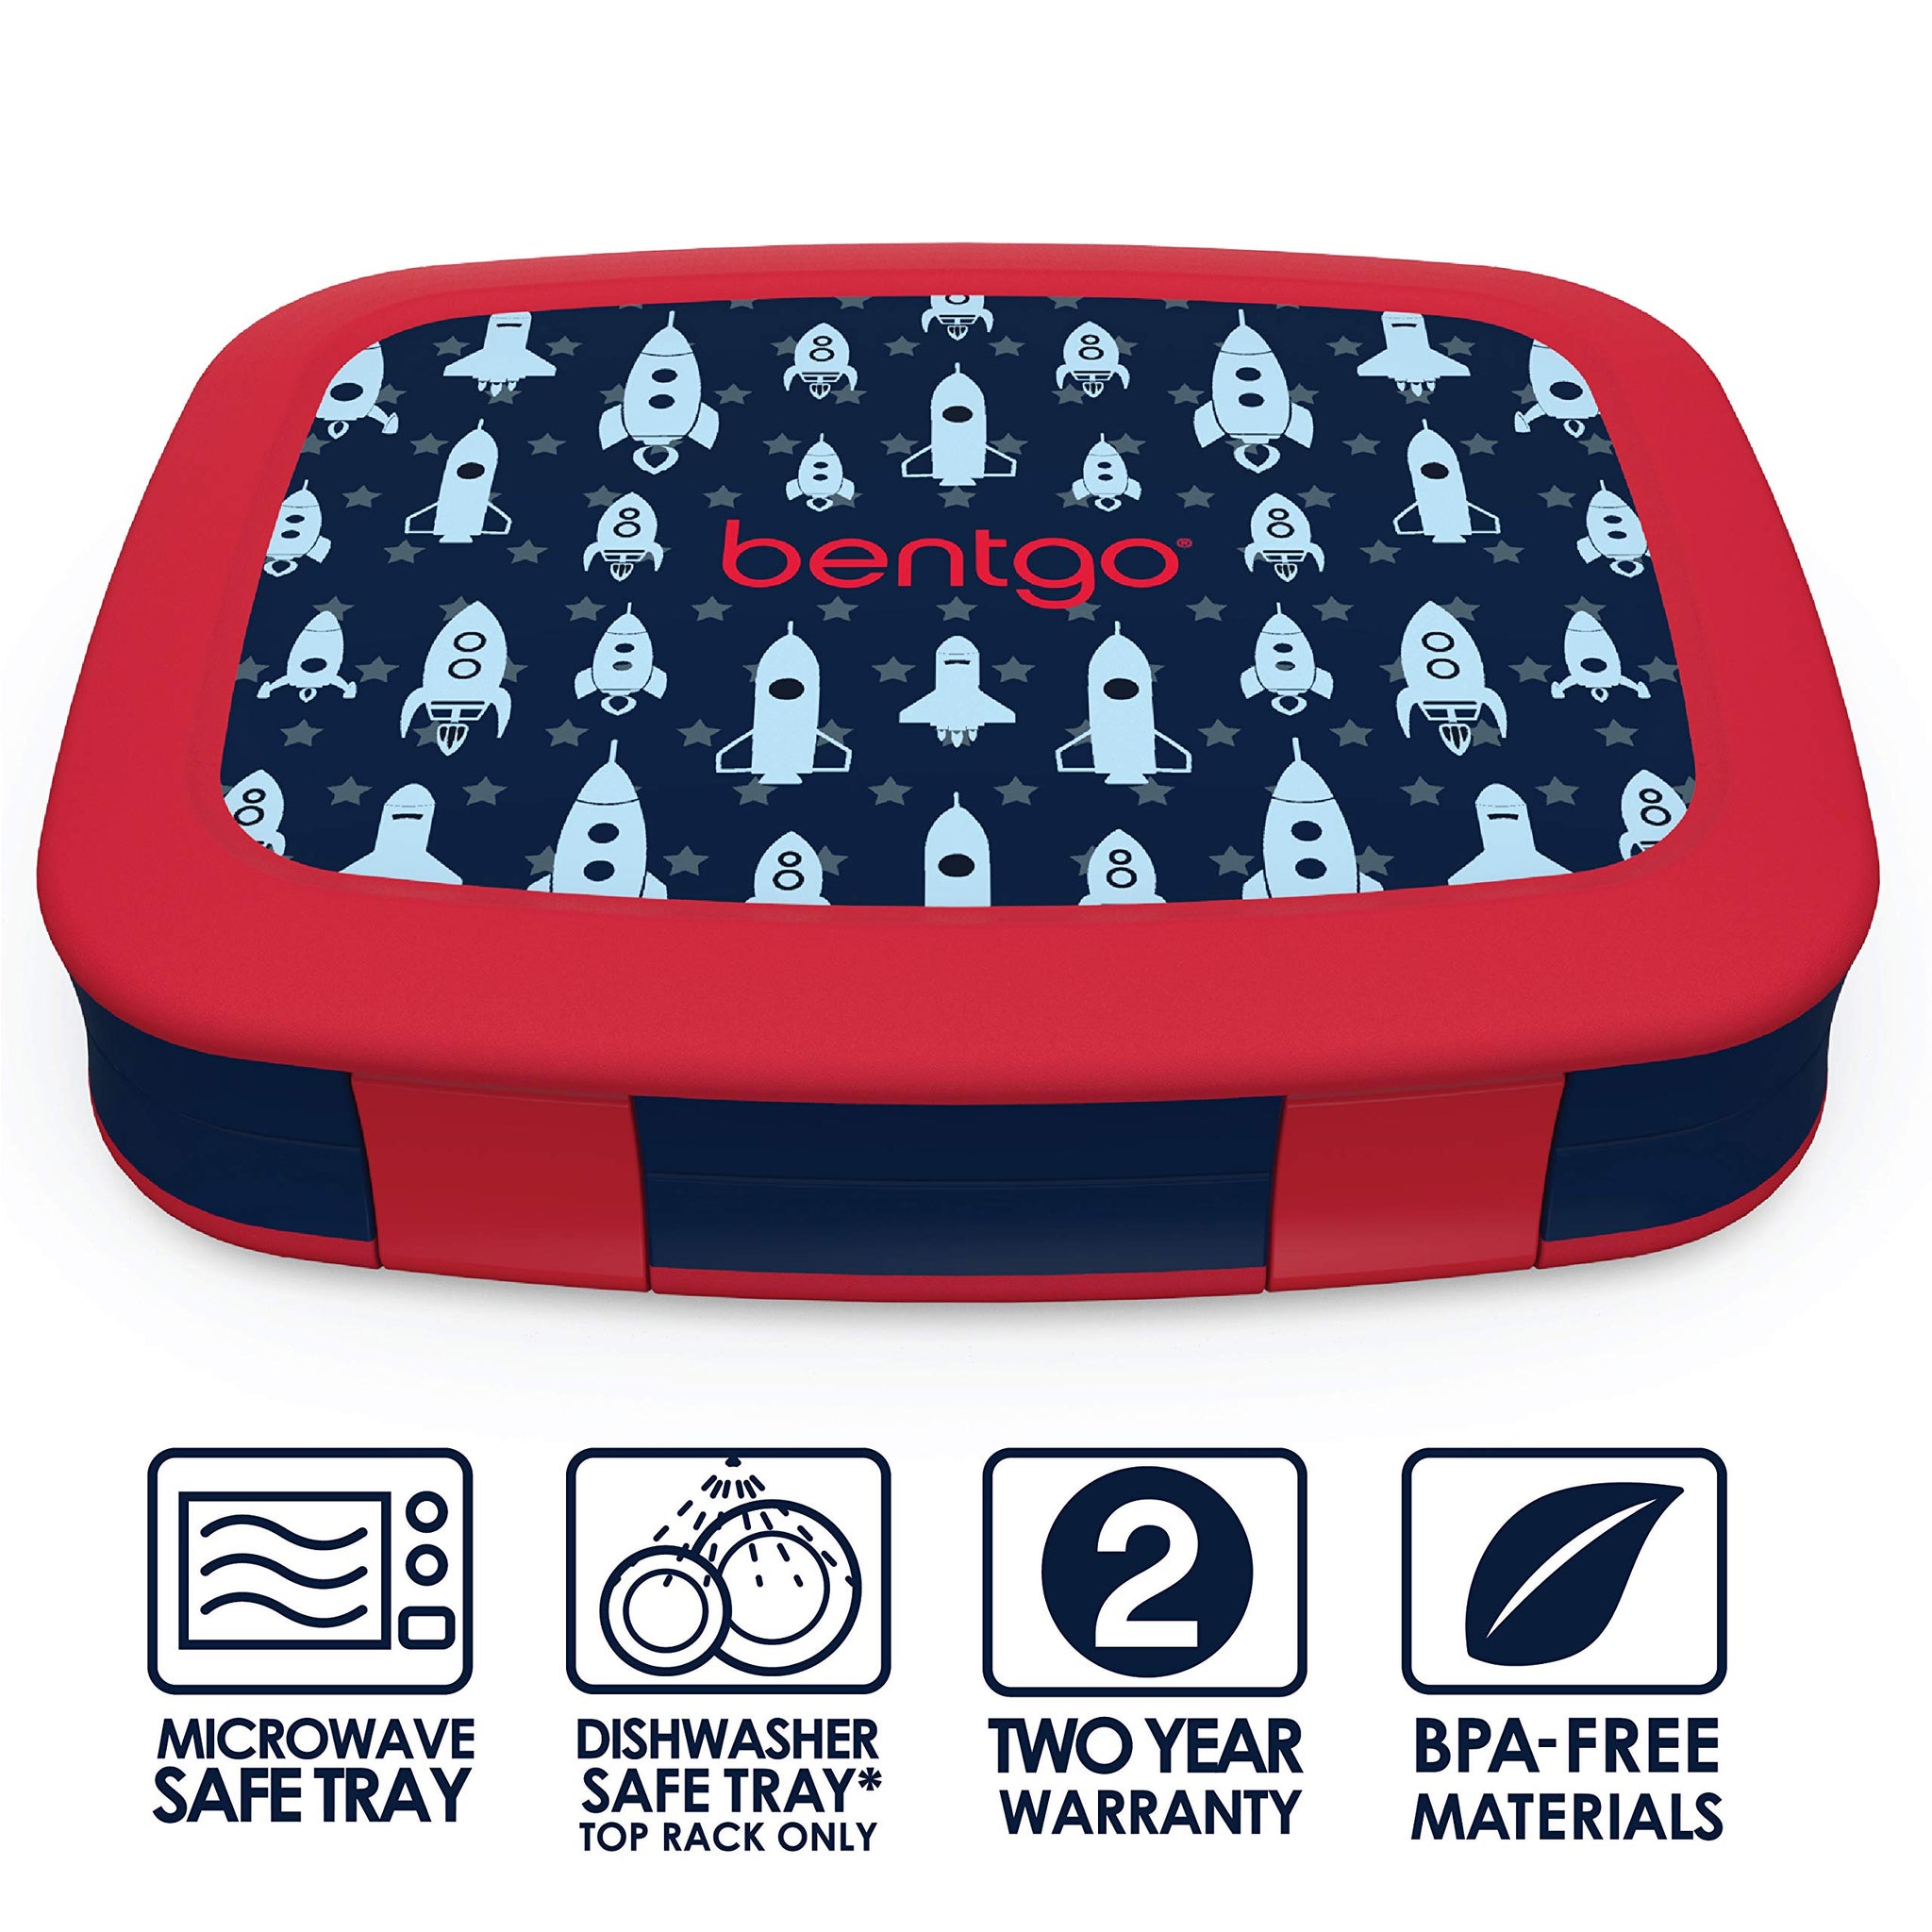 Lunch Box for Kids, 5-Compartment Bento-Style Kids Lunch Box with